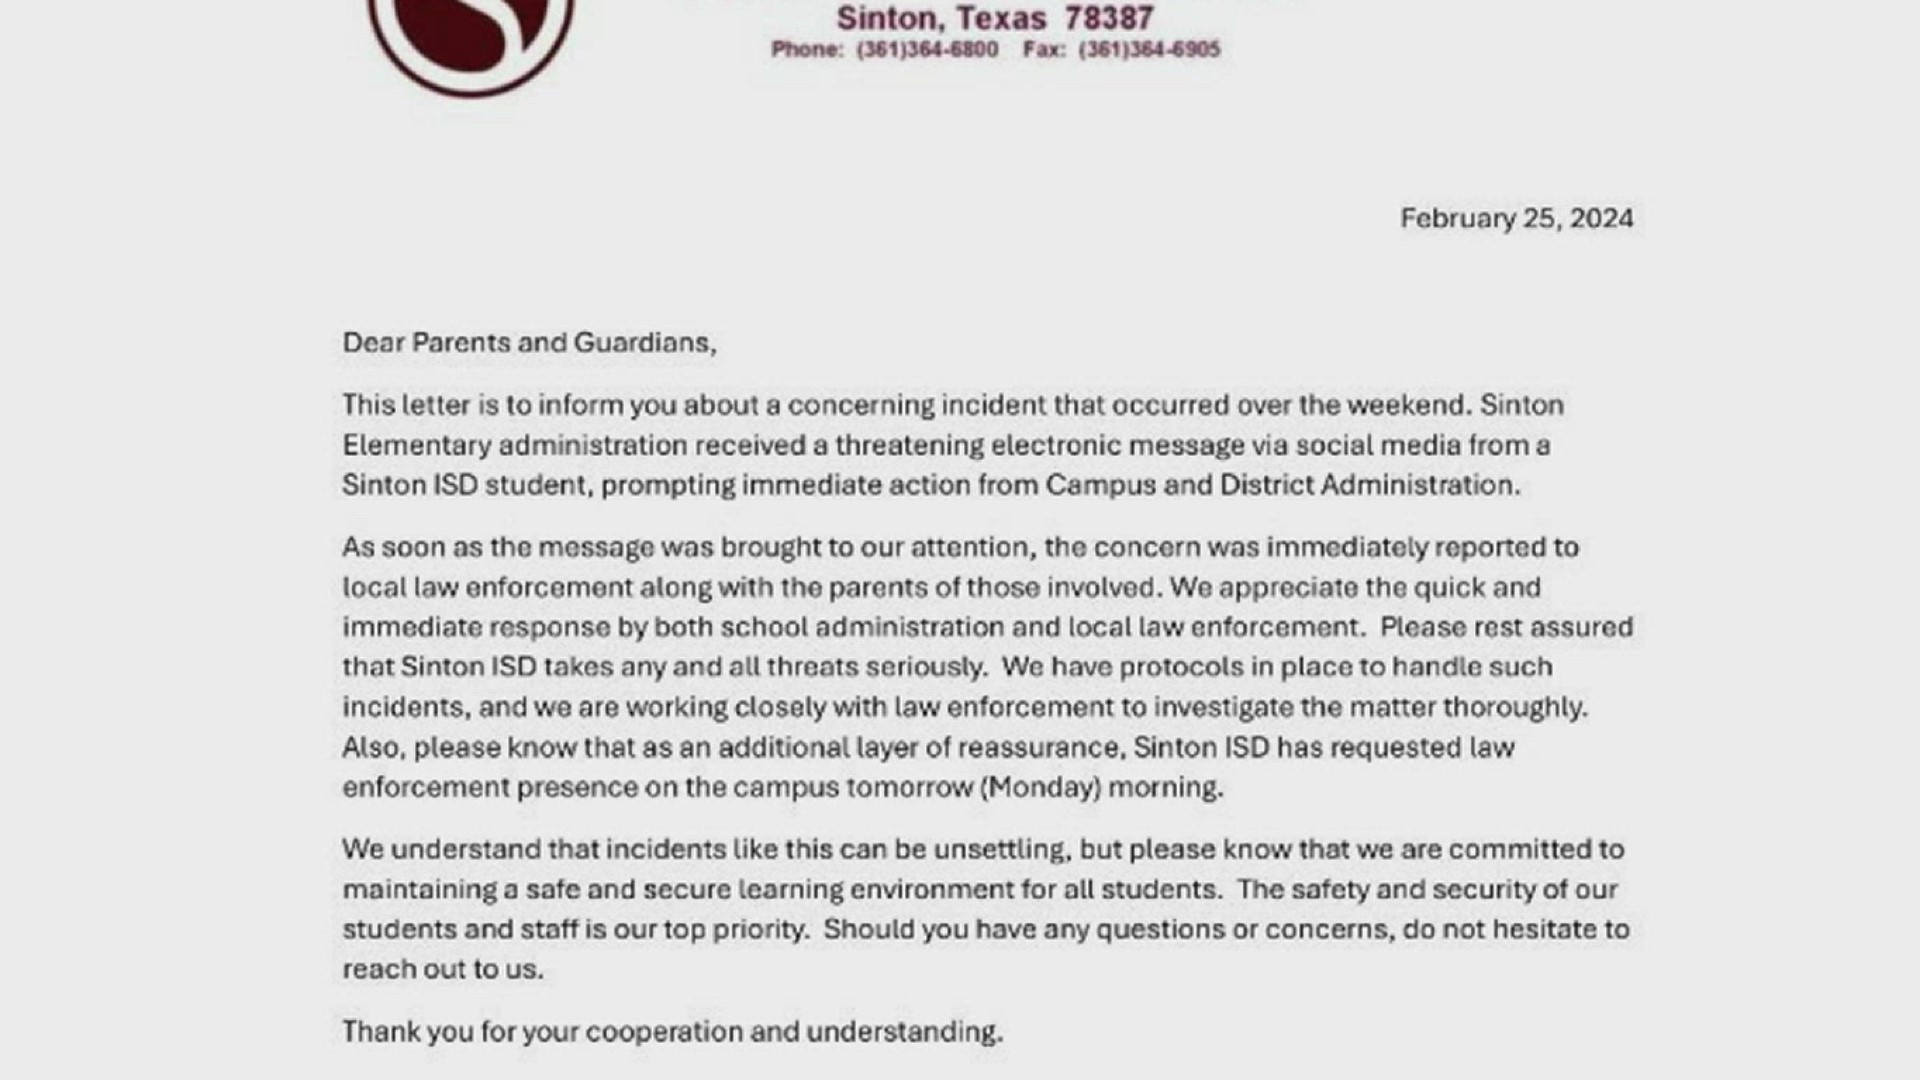 The district issued a release saying they promptly took action and reported the threat to local law enforcement and notified the parents of those involved.